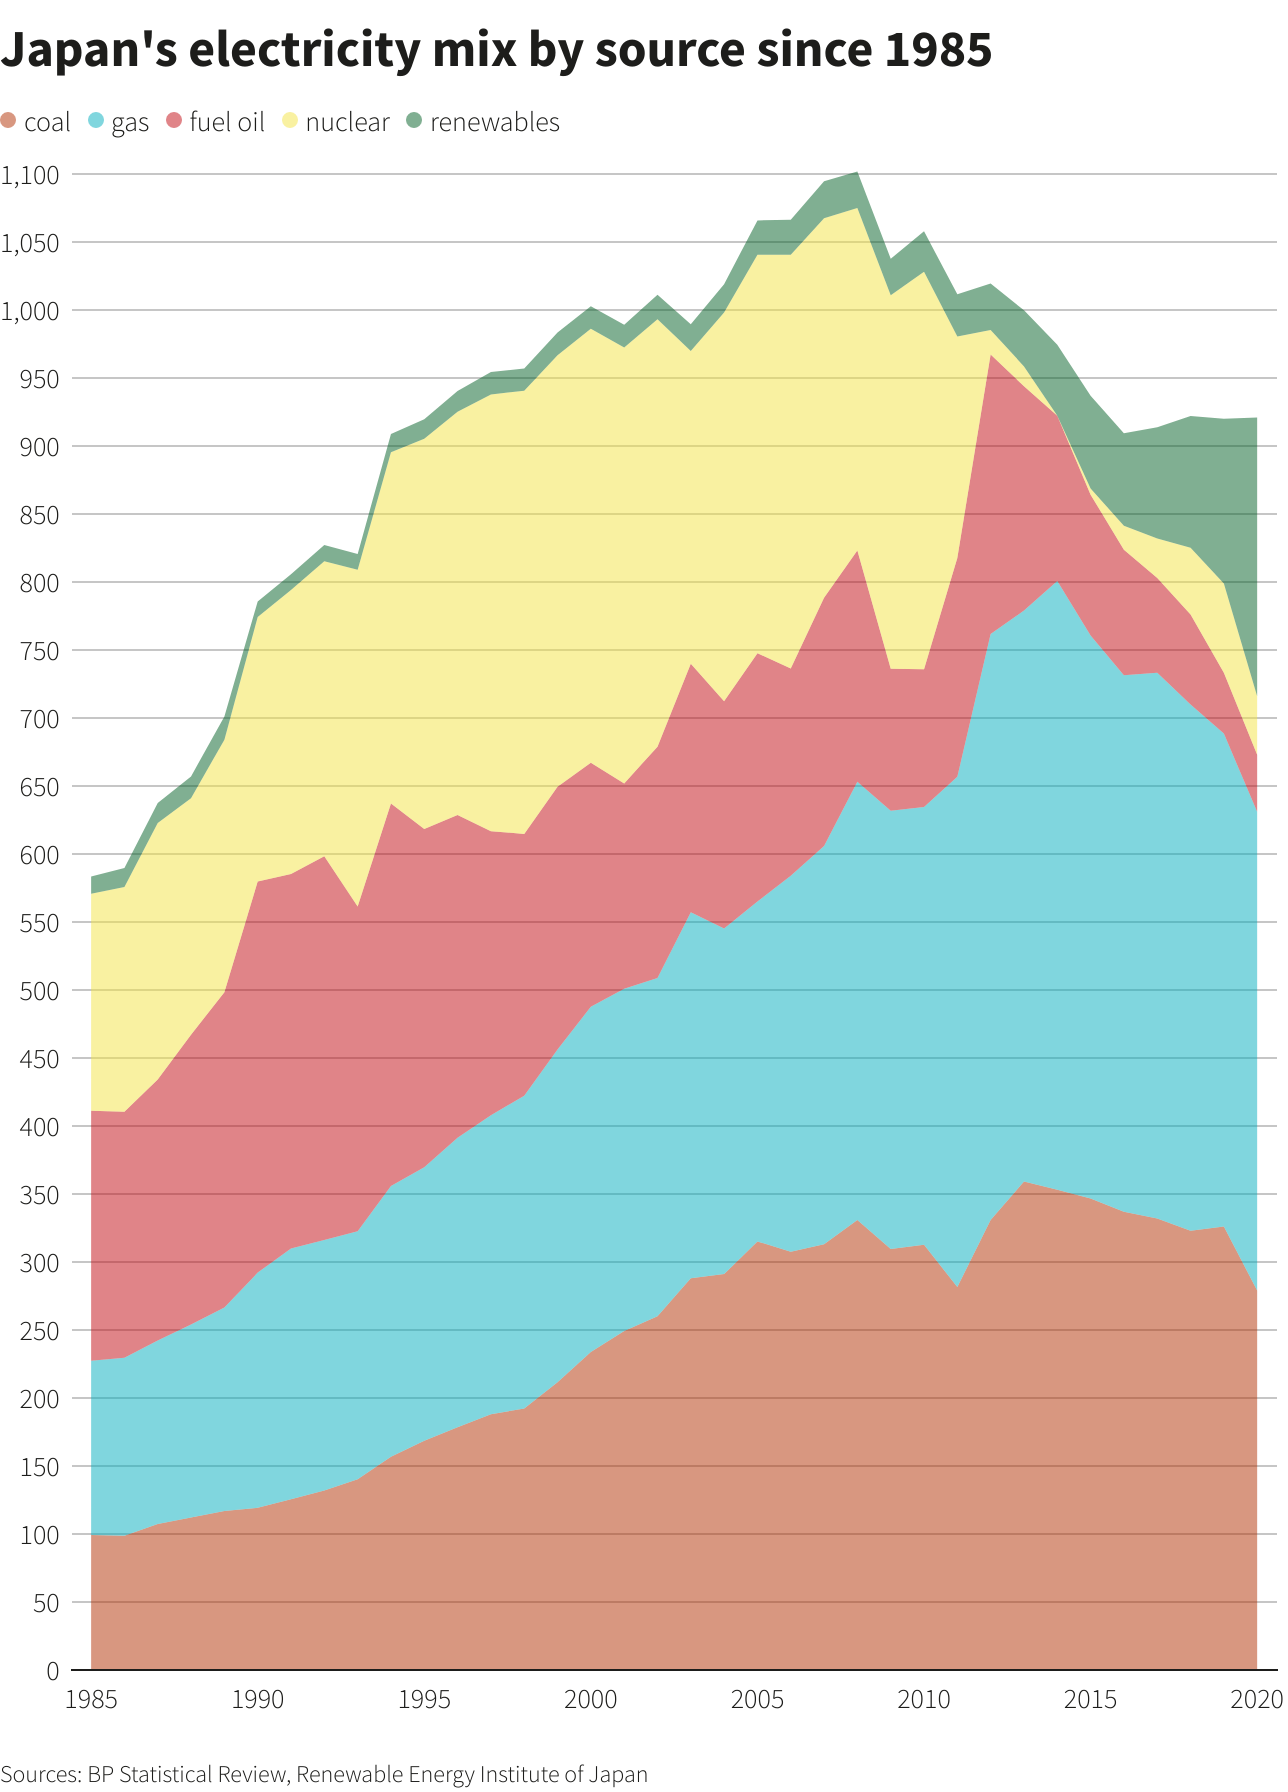 Japan's electricity mix by source since 1985